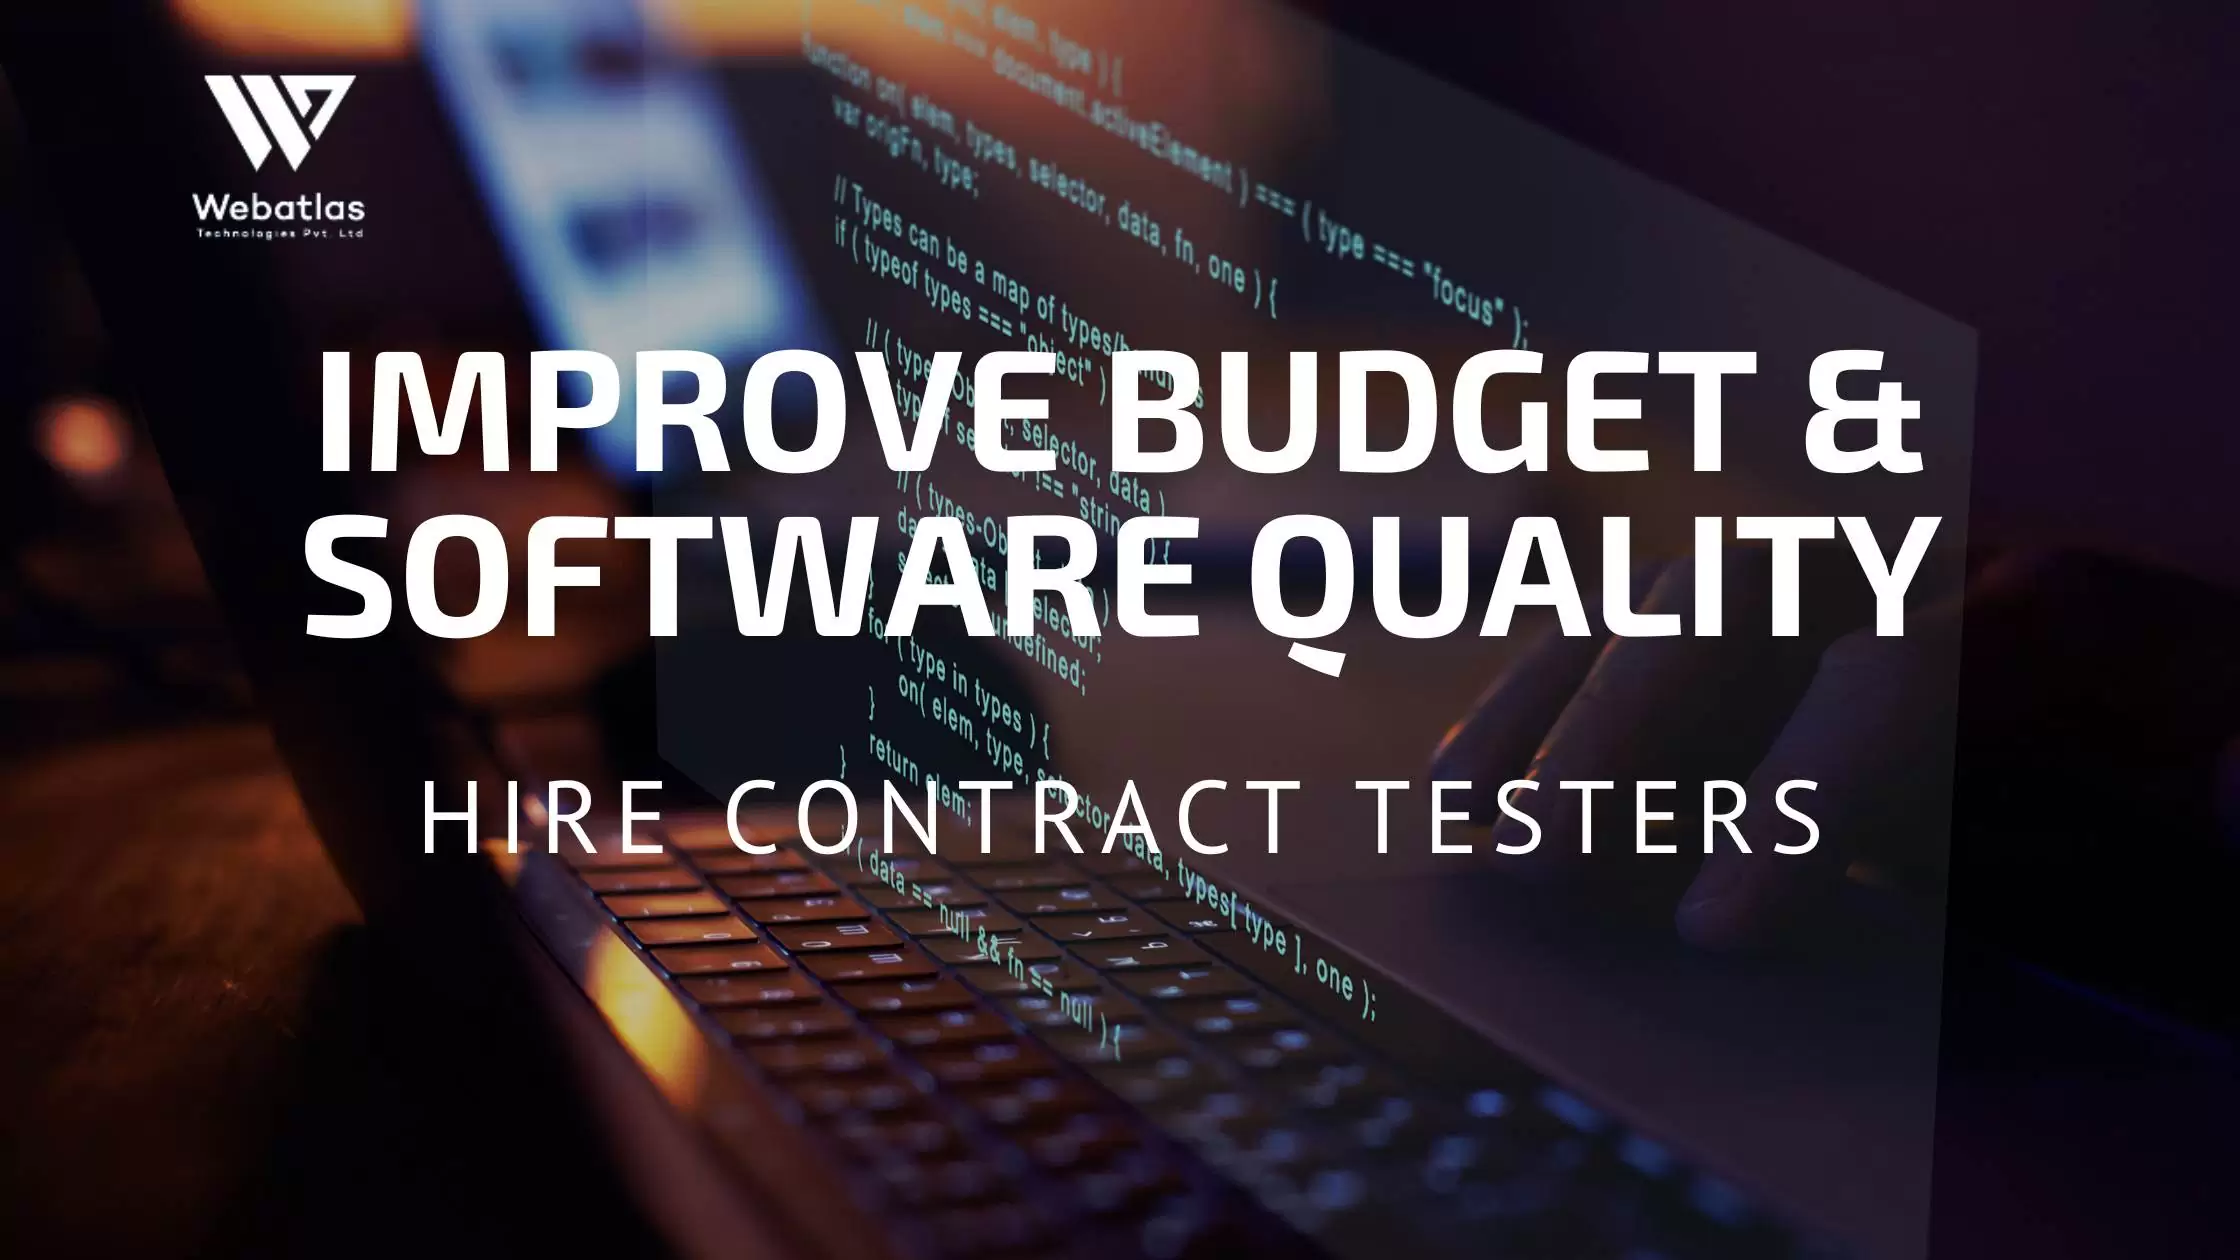 Smart Hiring: How Contract Software Testers Can Improve Your Budget